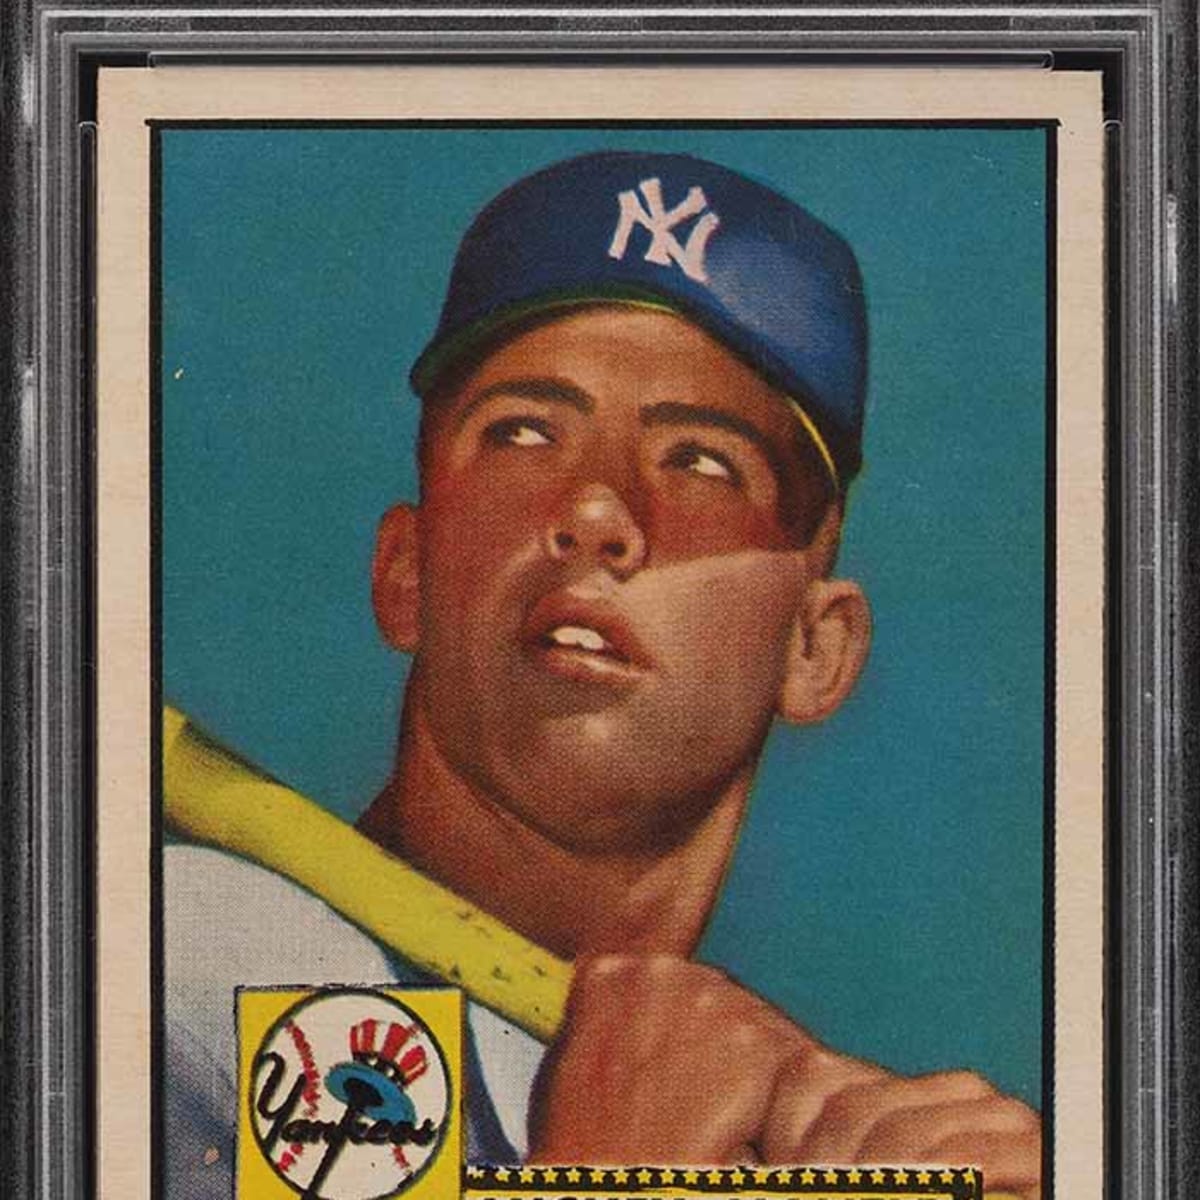 Top 10 Selling Sports Cards of All Time - Sports Collectors Digest